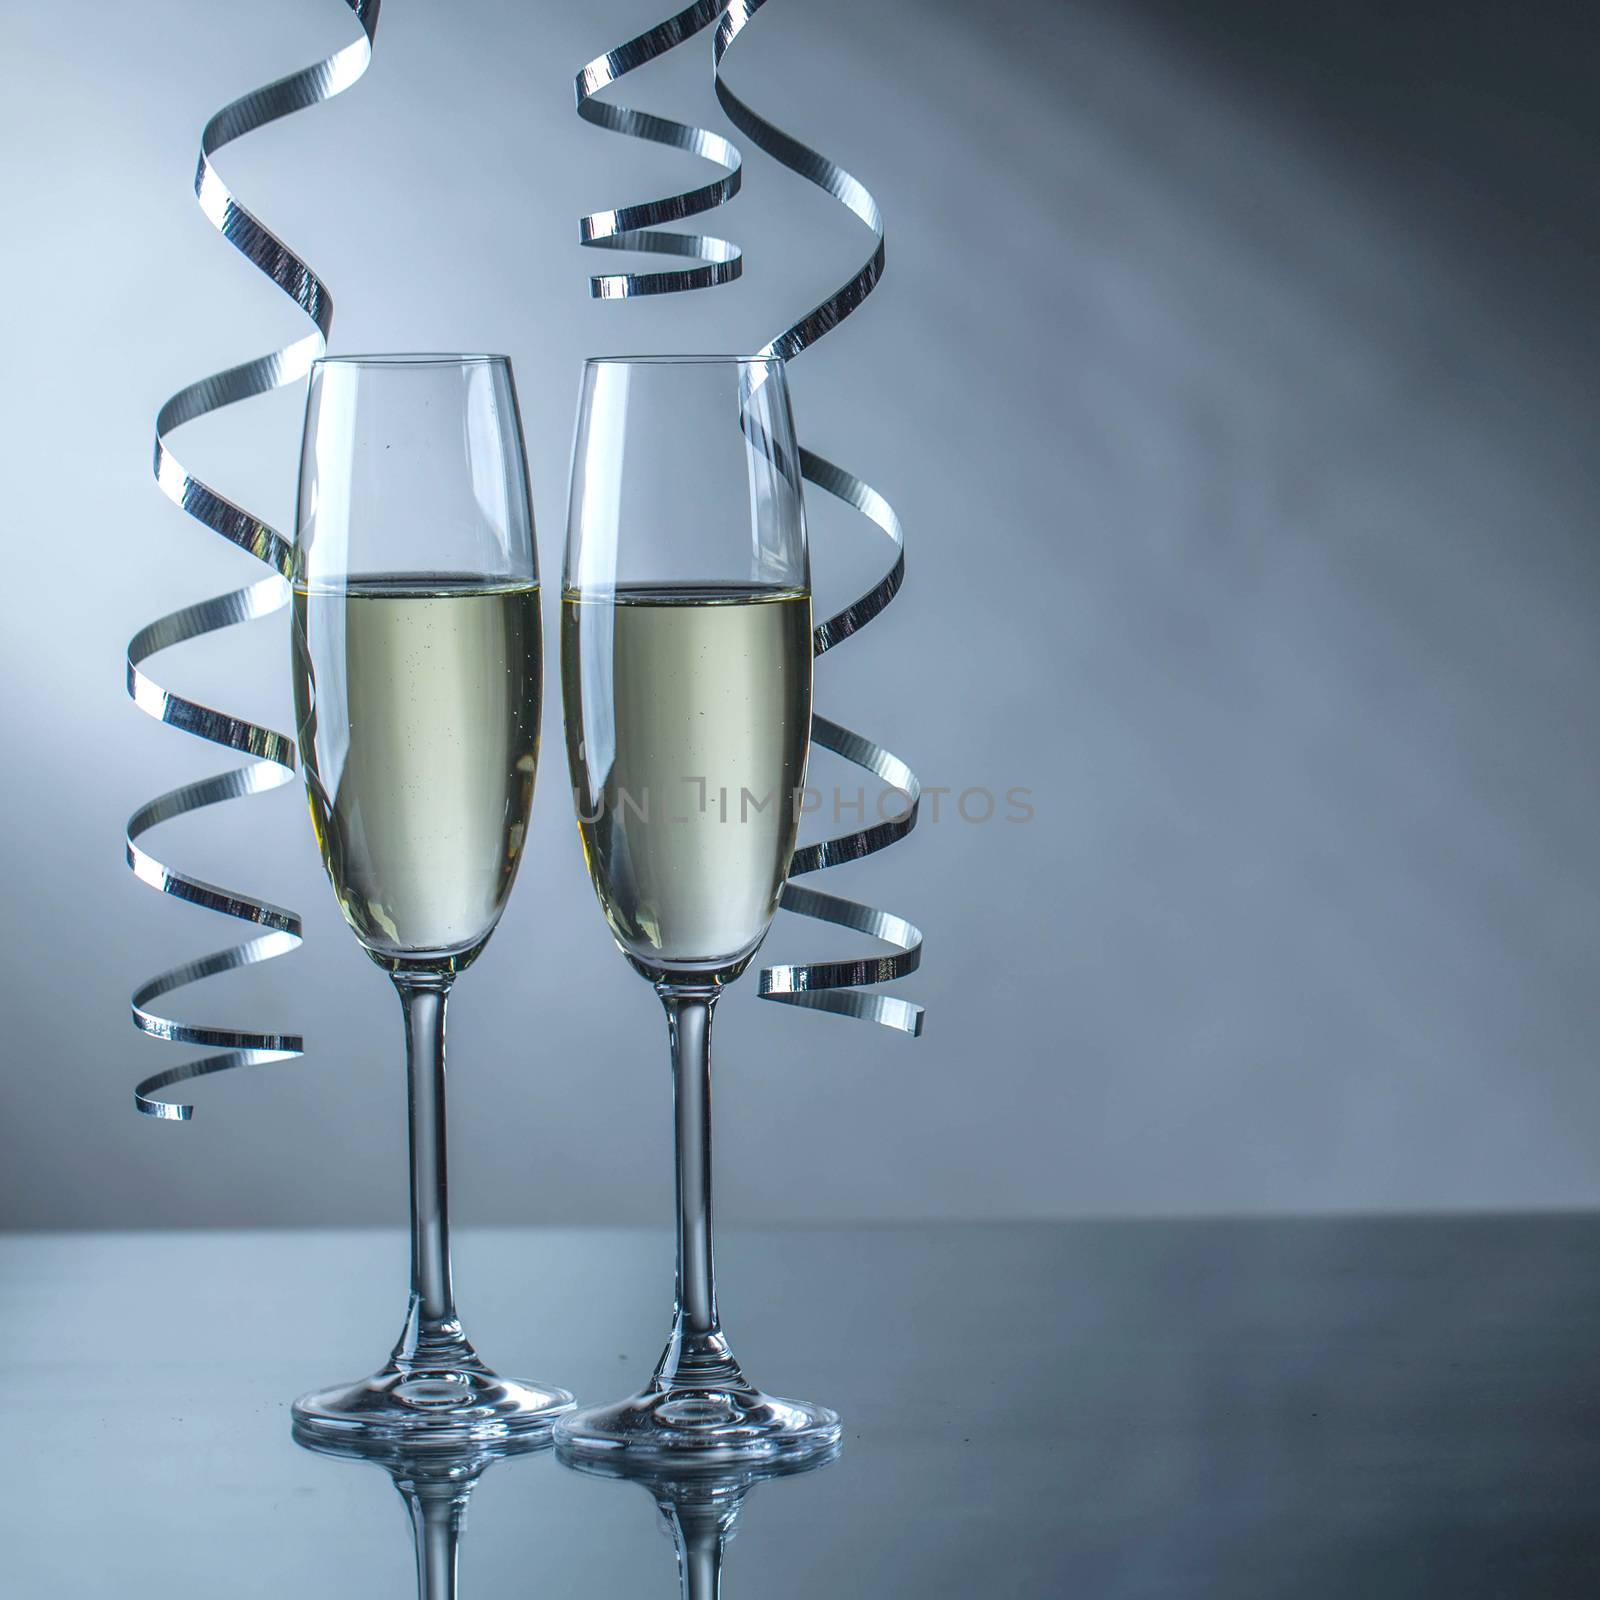 Two champagne glasses and curly ribbon party concept